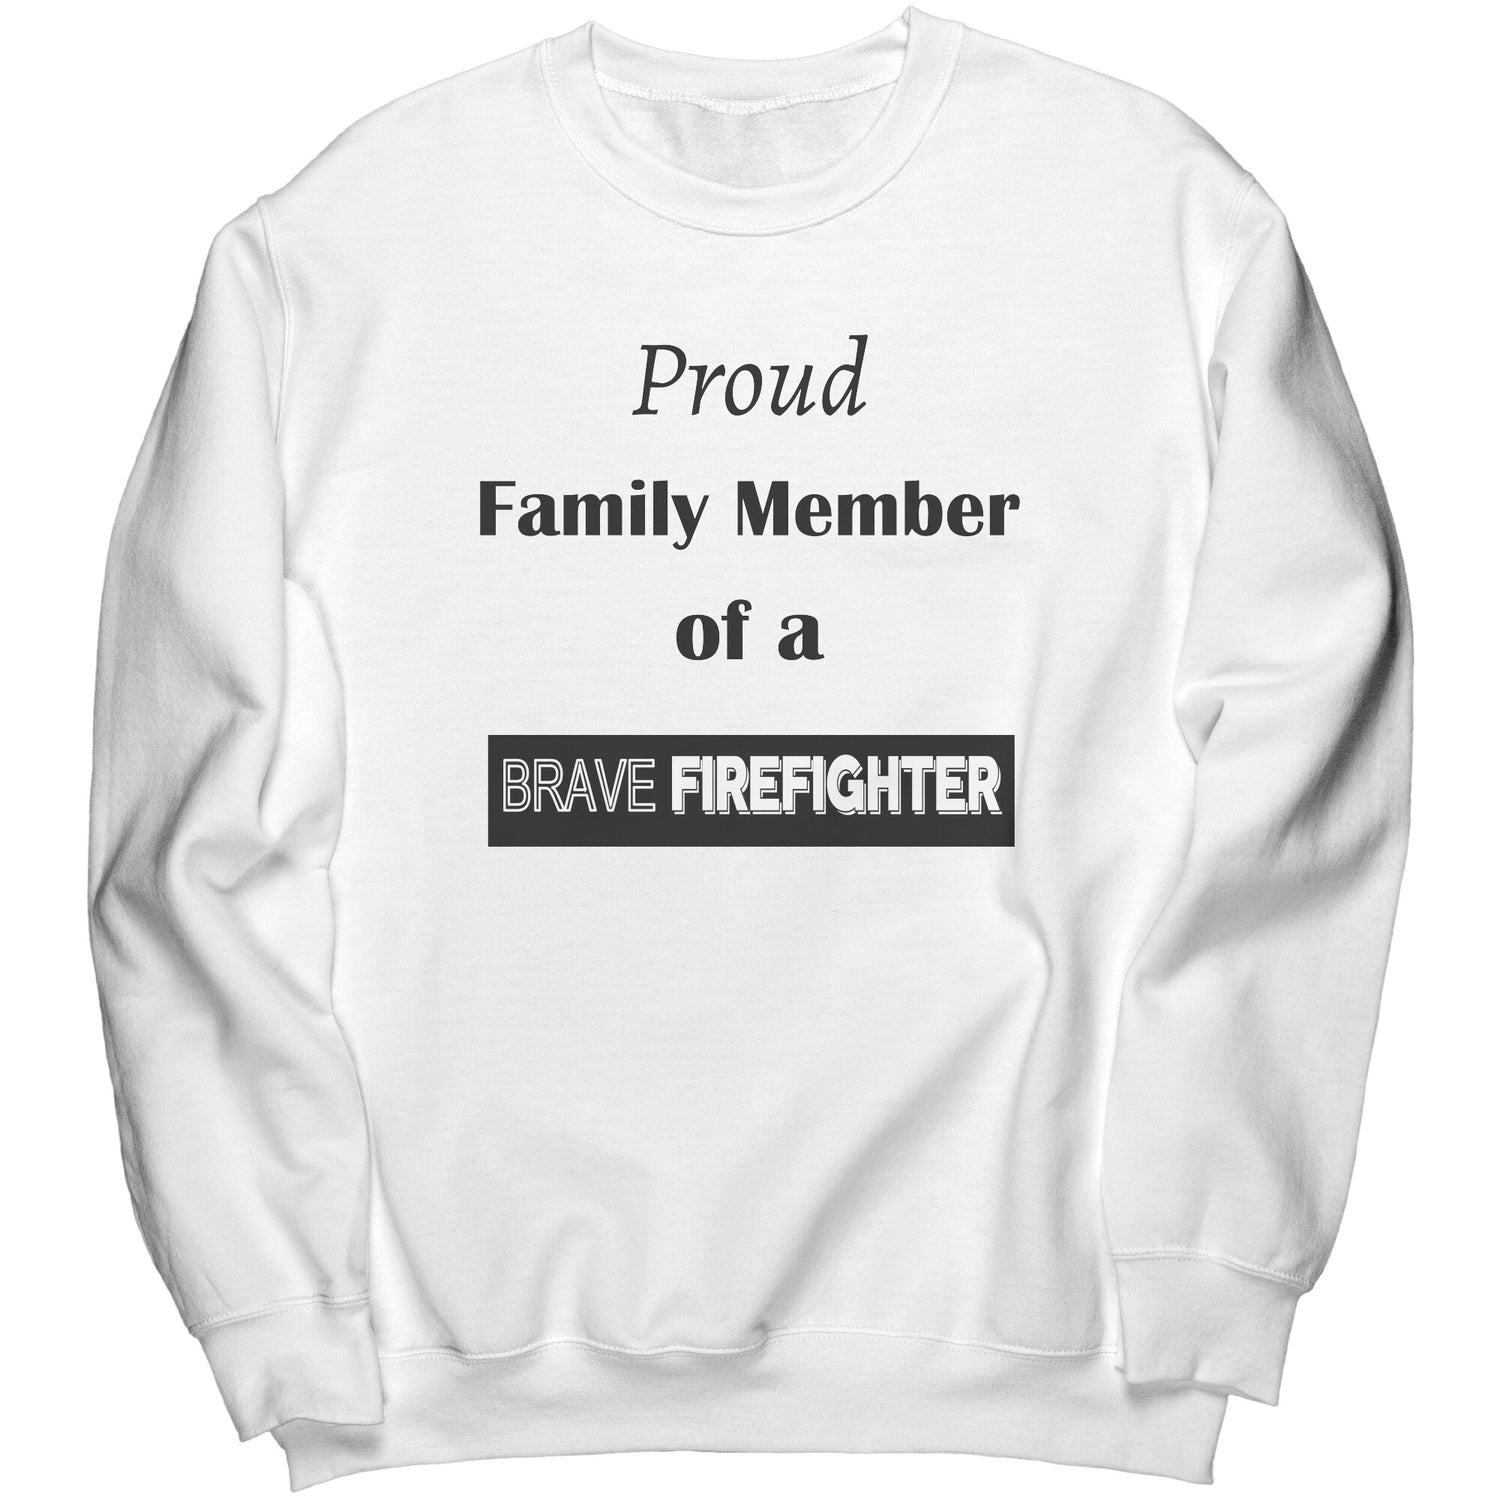 Proud Family Member of a Brave Firefighter Lettering Sweatshirt - Signs and Seasons Gifts